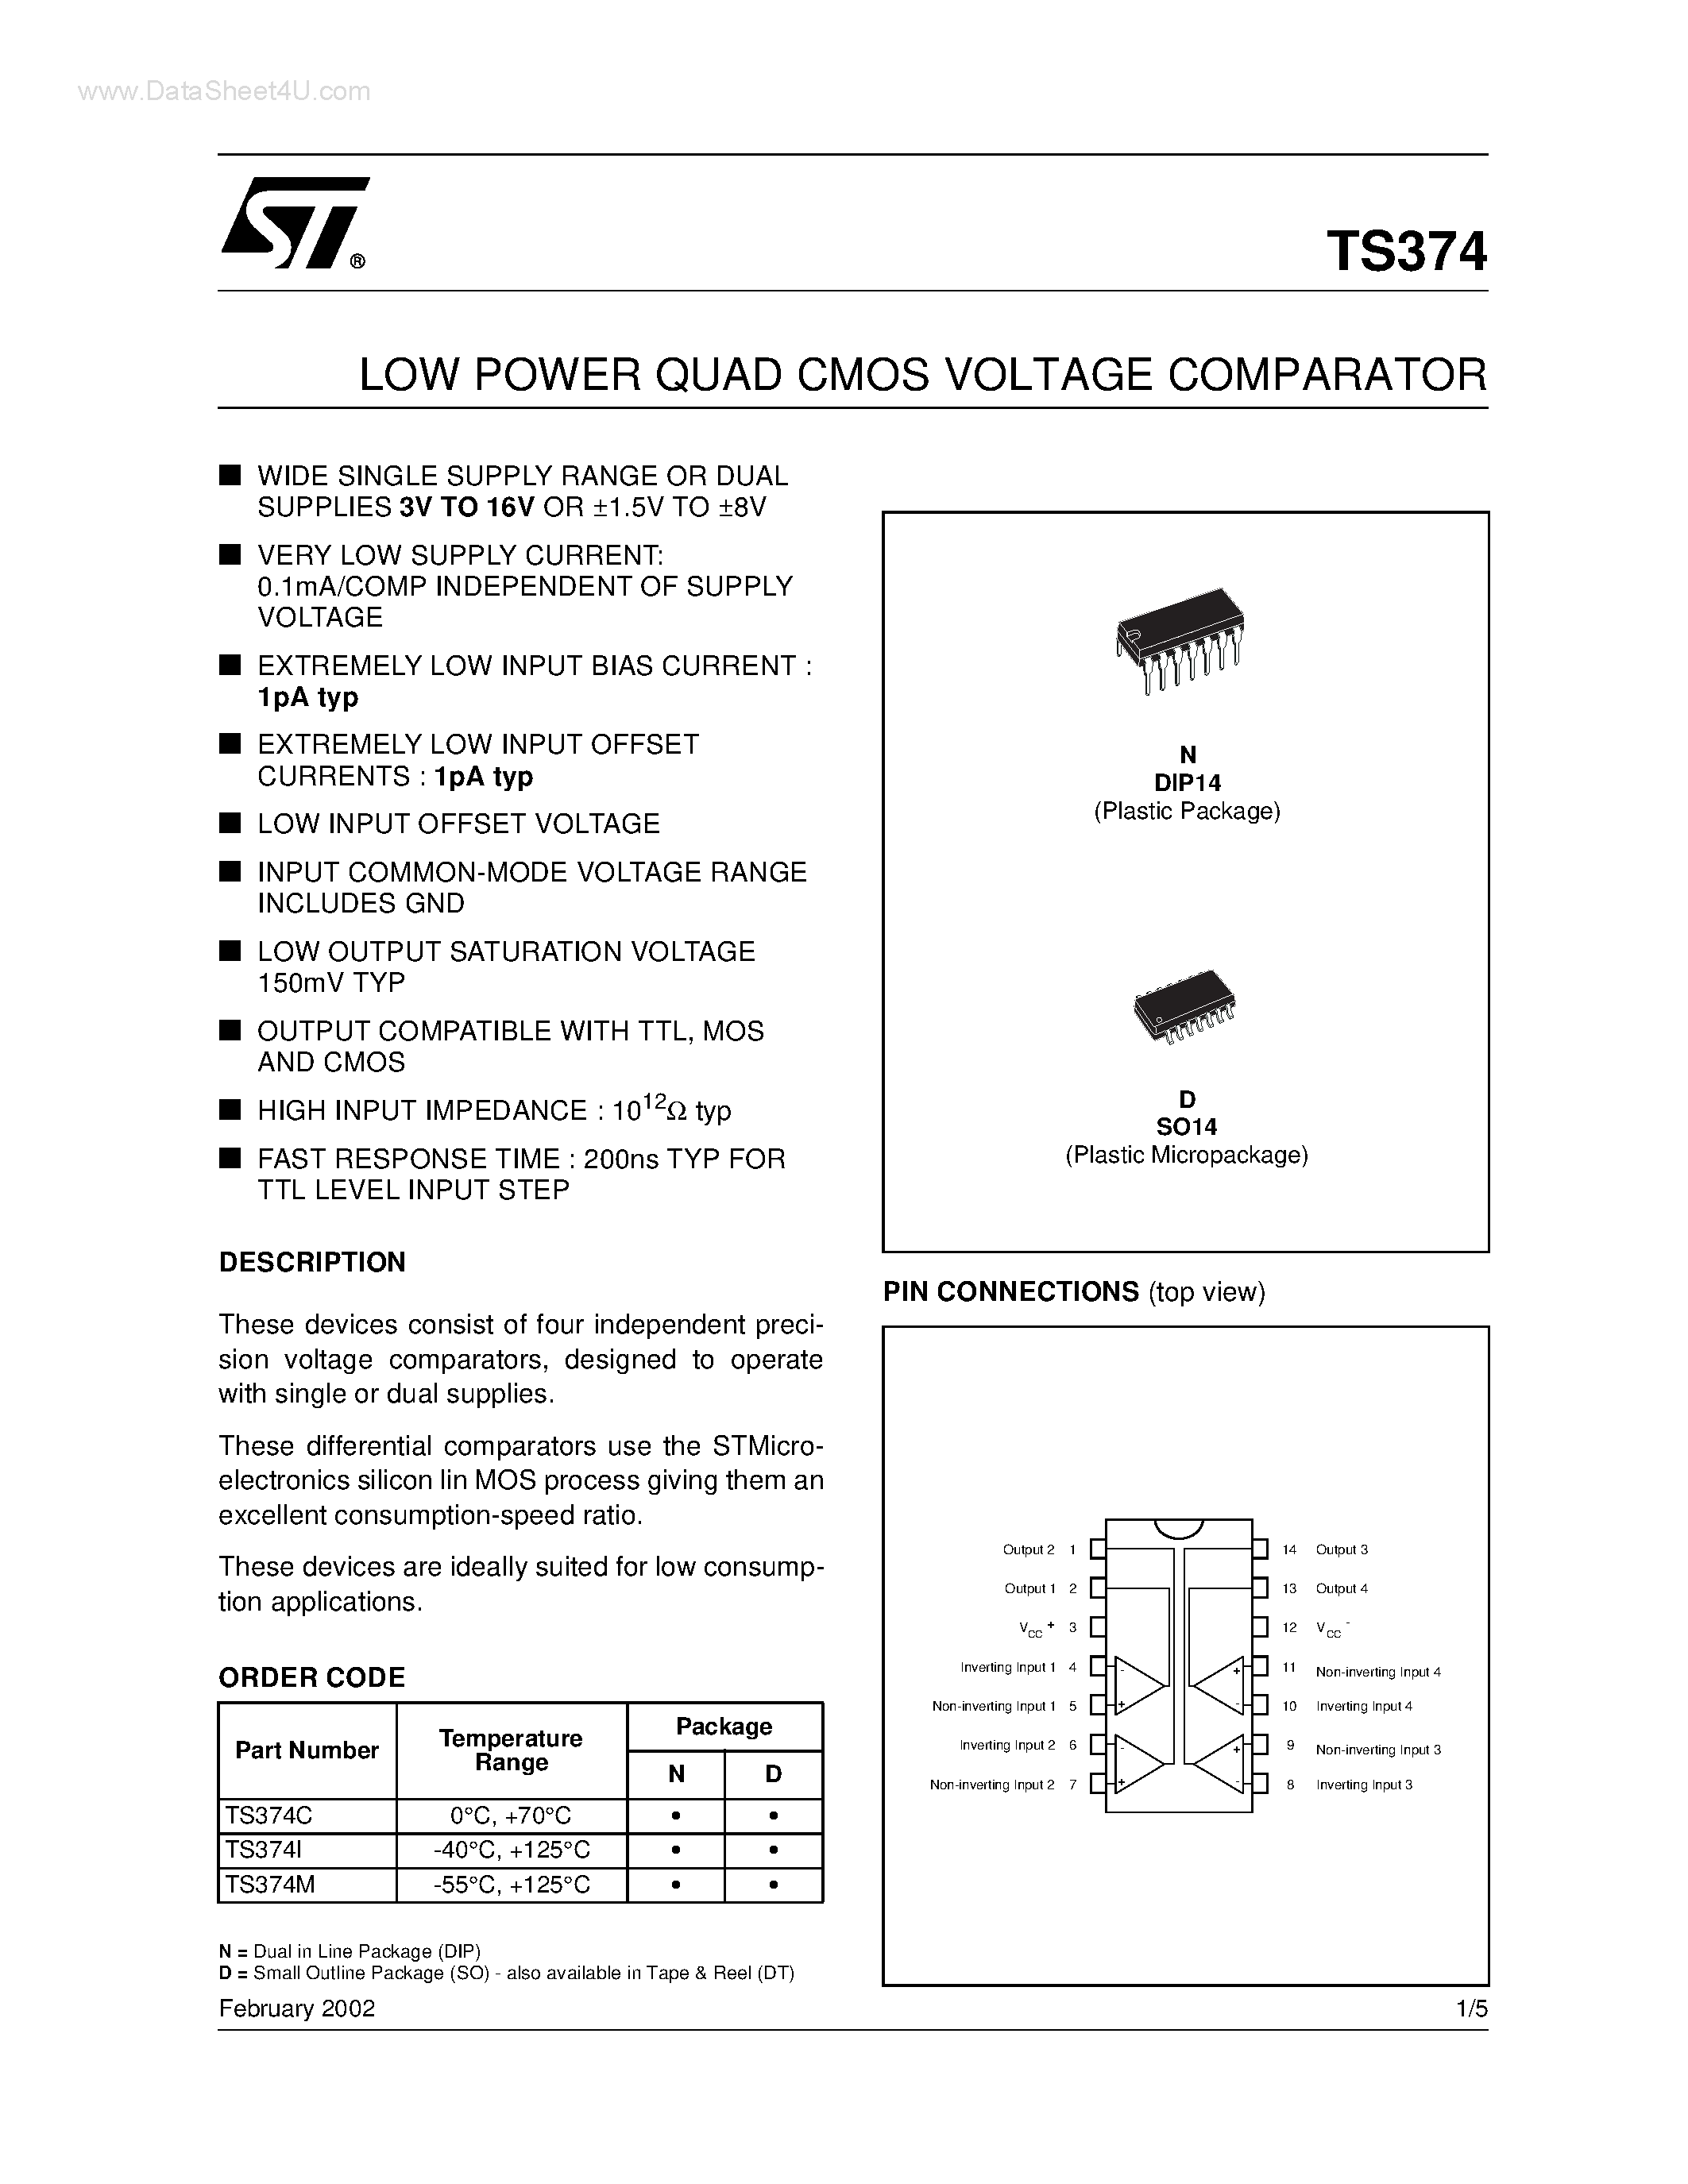 Datasheet TS374 - LOW POWER QUAD CMOS VOLTAGE COMPARATOR page 1